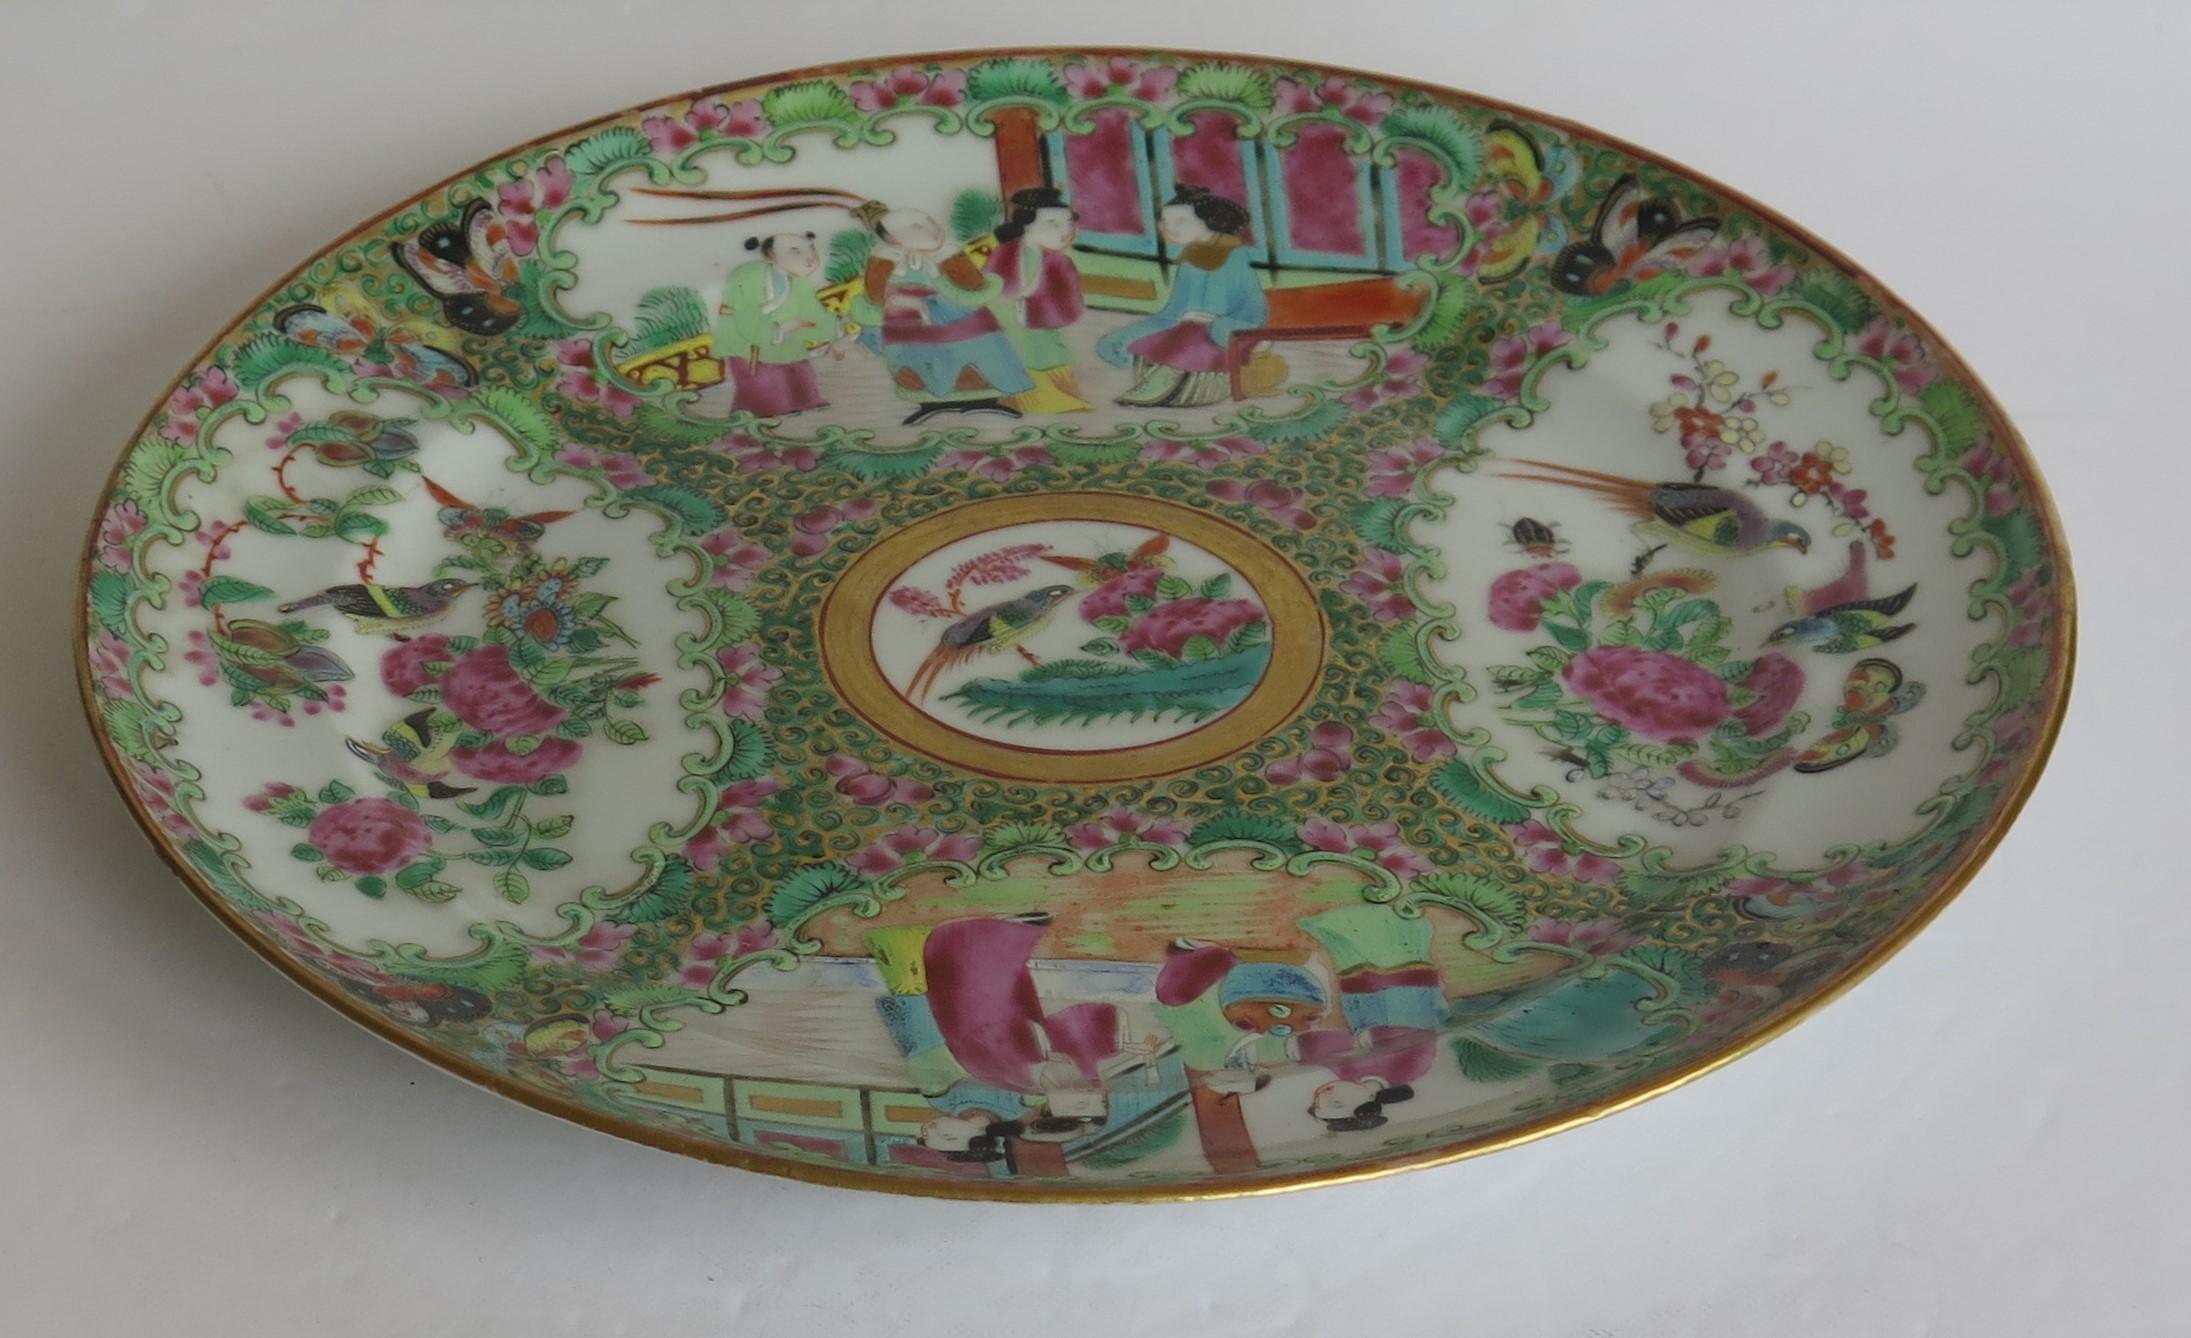 This is a very decorative, good quality, Chinese export, porcelain, Rose Medallion Large Dinner Plate, which we date to the early 19th century, Qing dynasty, circa 1820 or possibly earlier.

The dinner plate is well potted and quite heavy with a